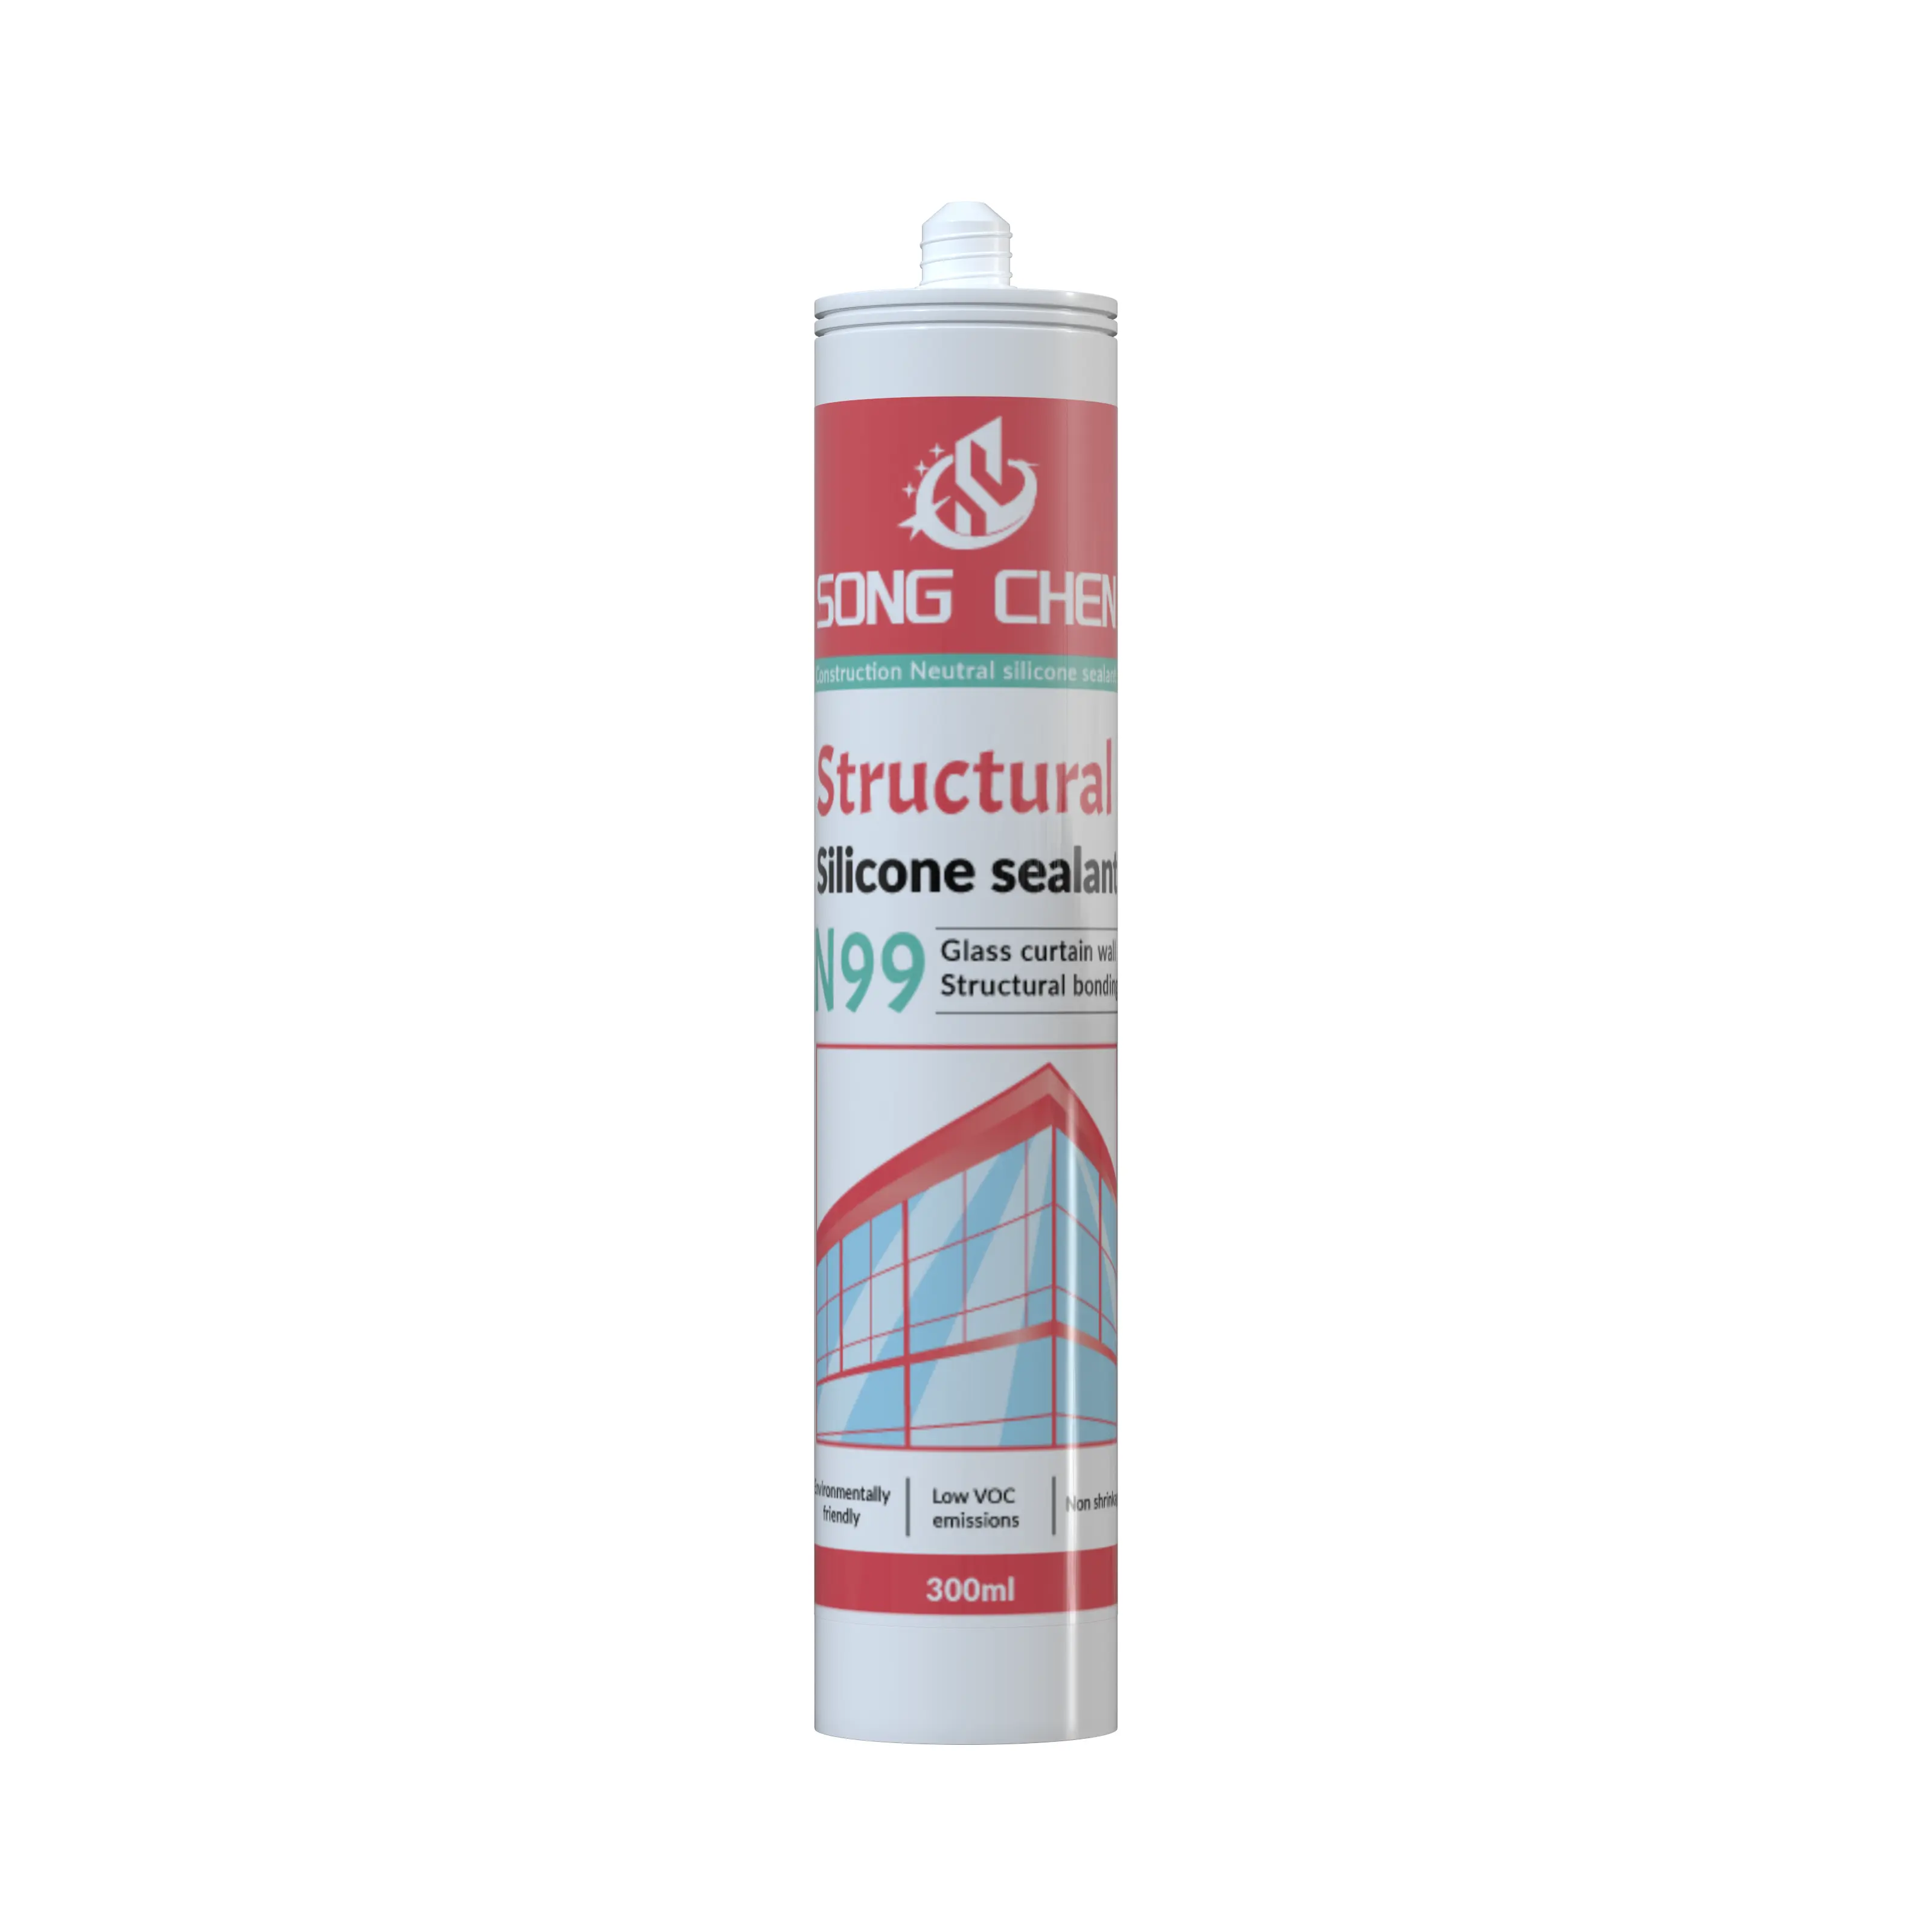 Advanced N99 Anti-Cracking Neutral Silicone Sealant Fast Curing with Good Weather Resistance for Construction Use